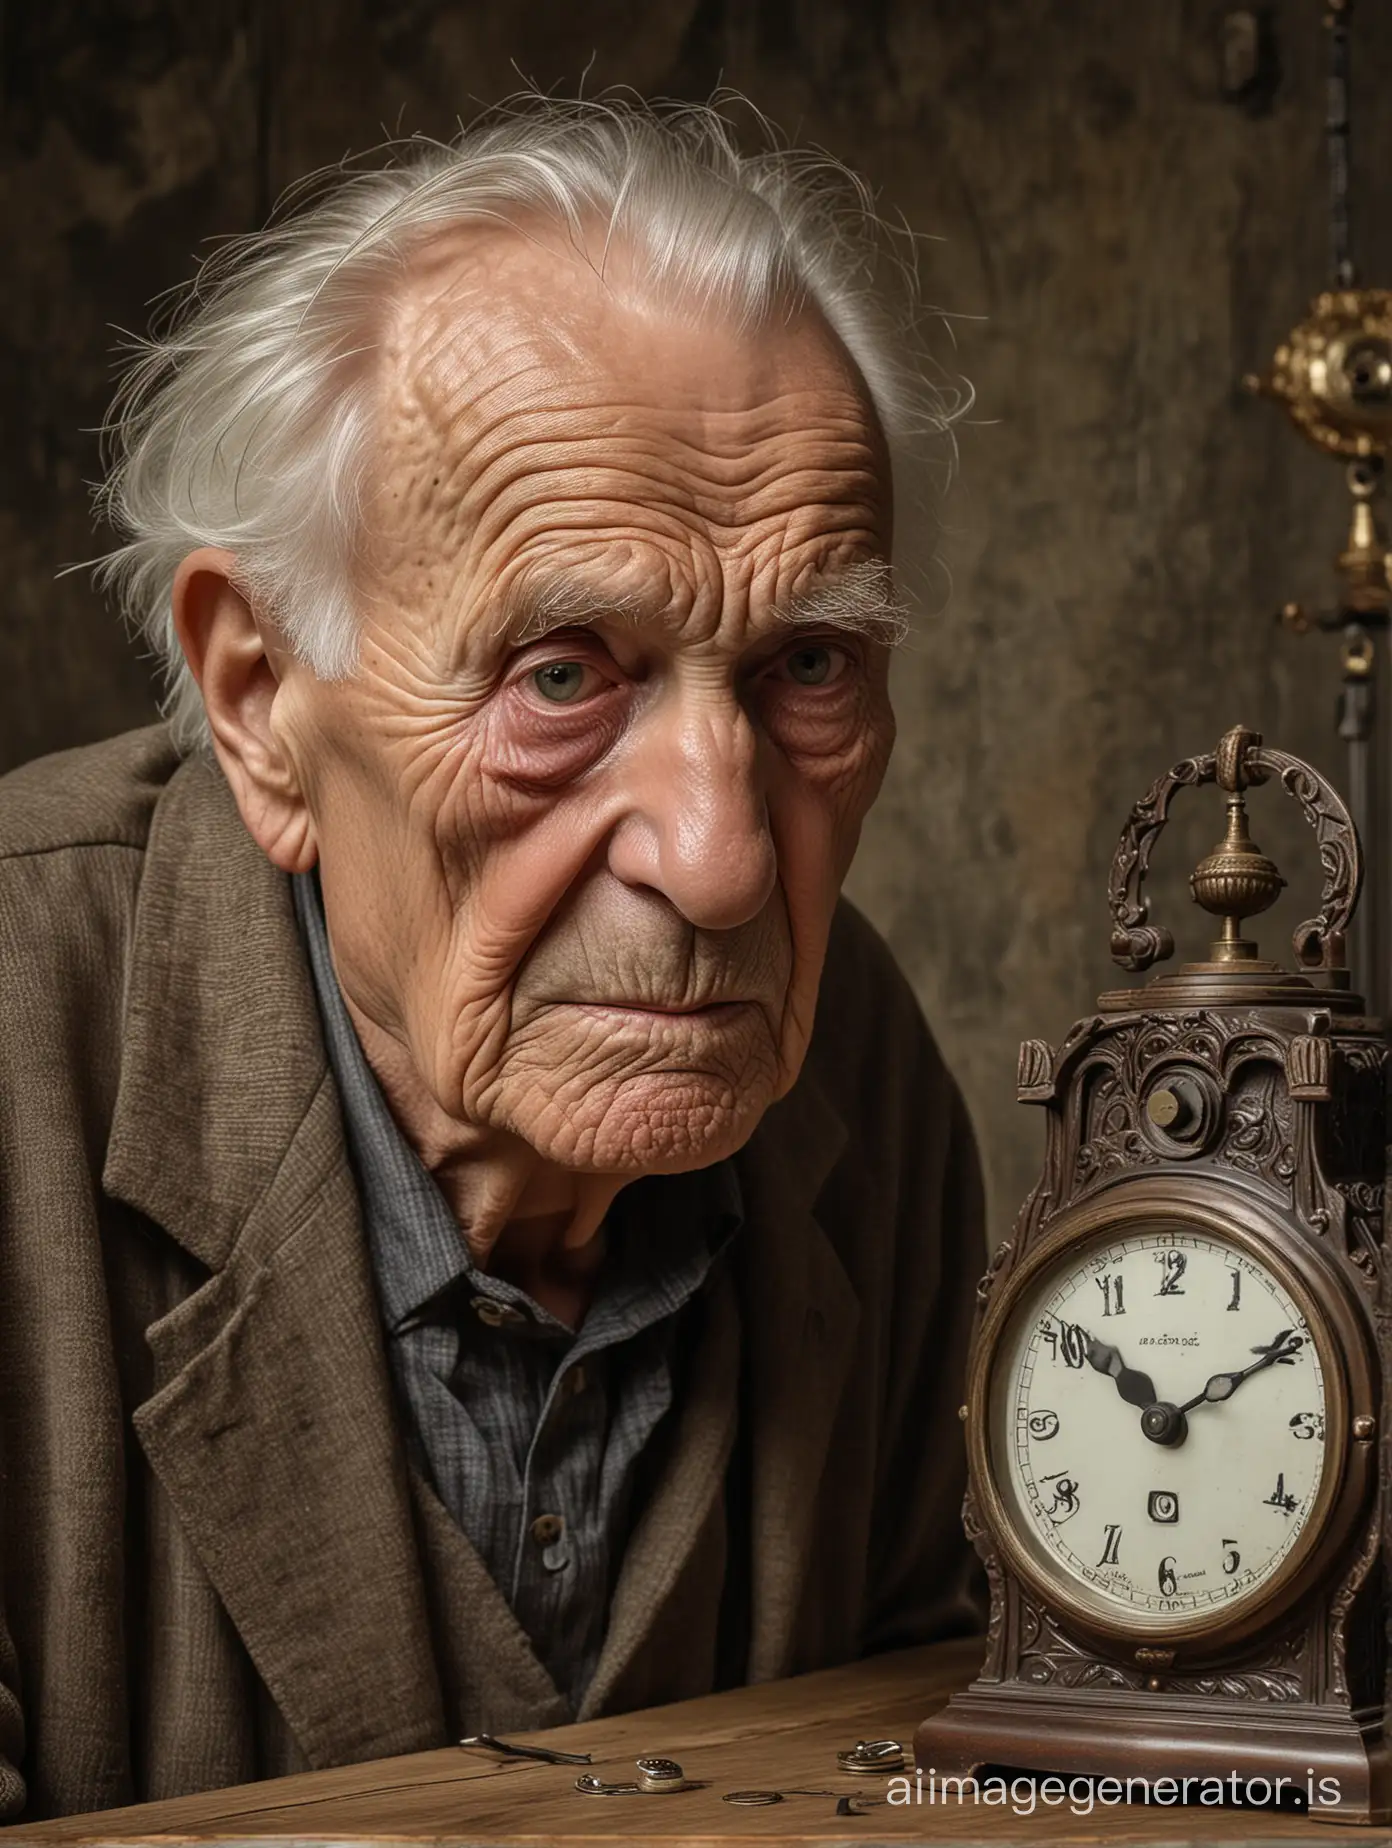 Contemplative-Portrait-of-a-Wrinkled-90YearOld-Man-by-Antique-Pendulum-Clock